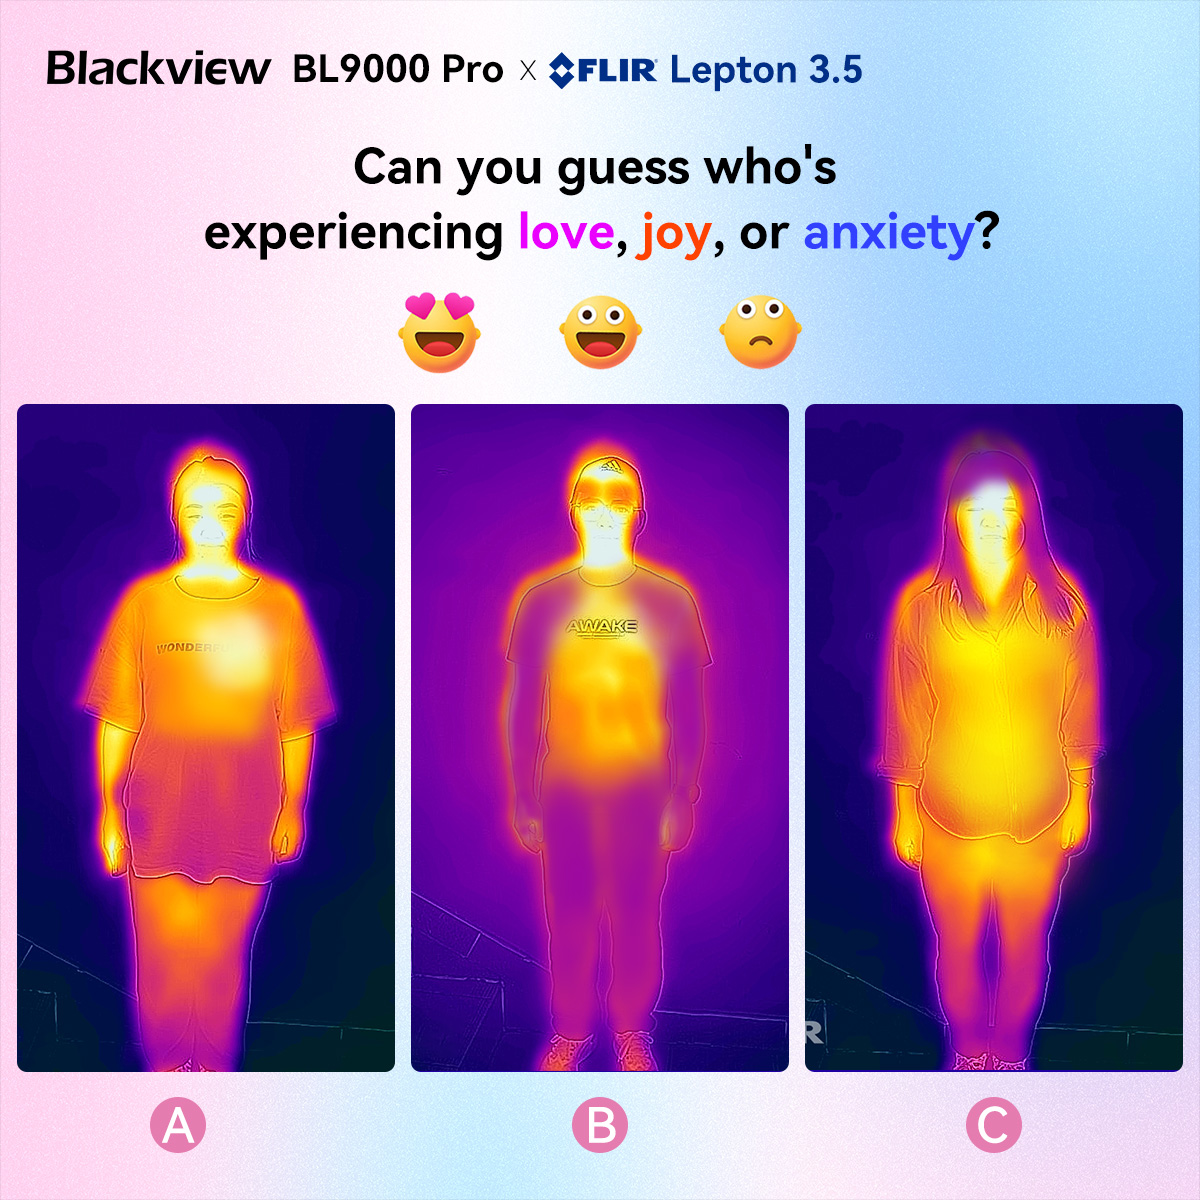 It's time for a mood check! We've snapped three pics of our team using the #Blackview #BL9000Pro with upgraded #FLIR thermal tech. Can you read their emotions? Let's play!
Explore more: s.click.aliexpress.com/e/_oEi5QH6